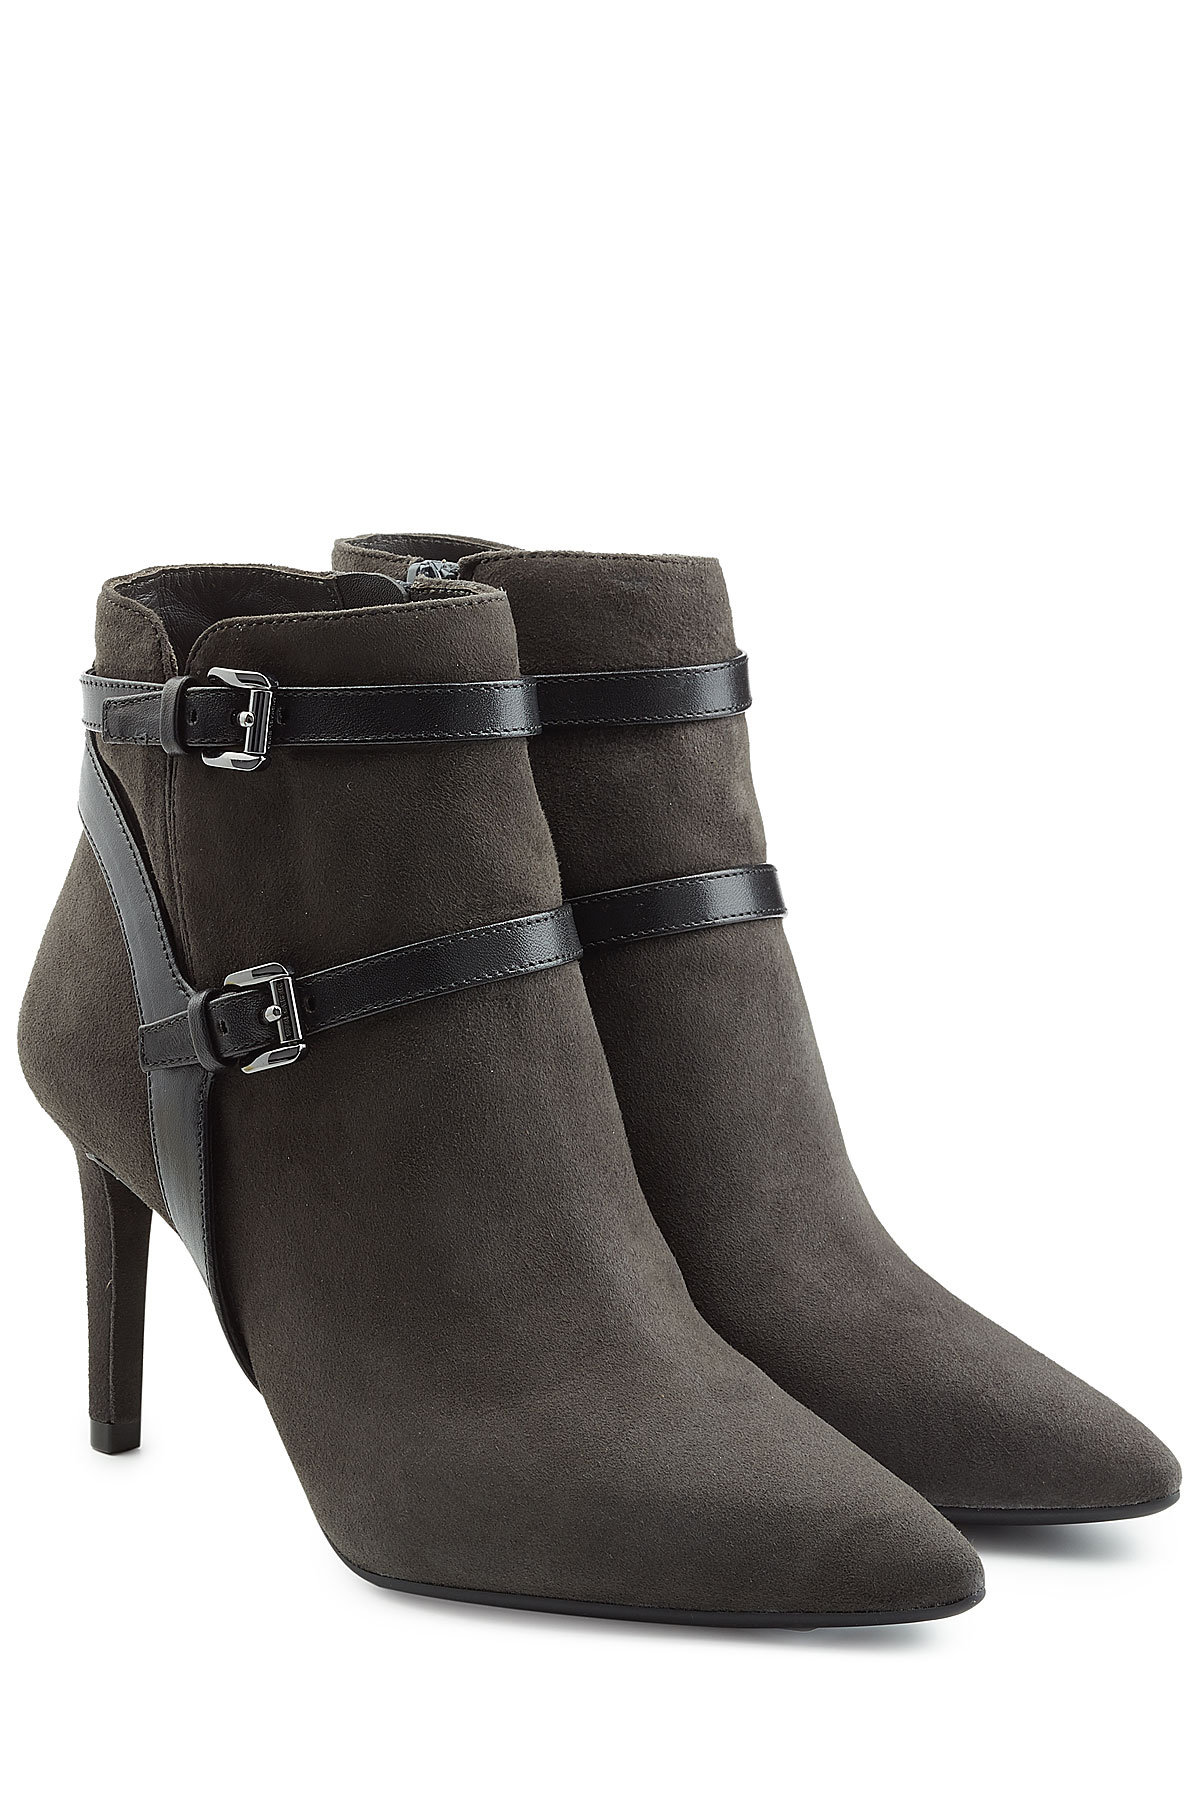 MICHAEL Michael Kors - Suede Ankle Boots with Leather Straps